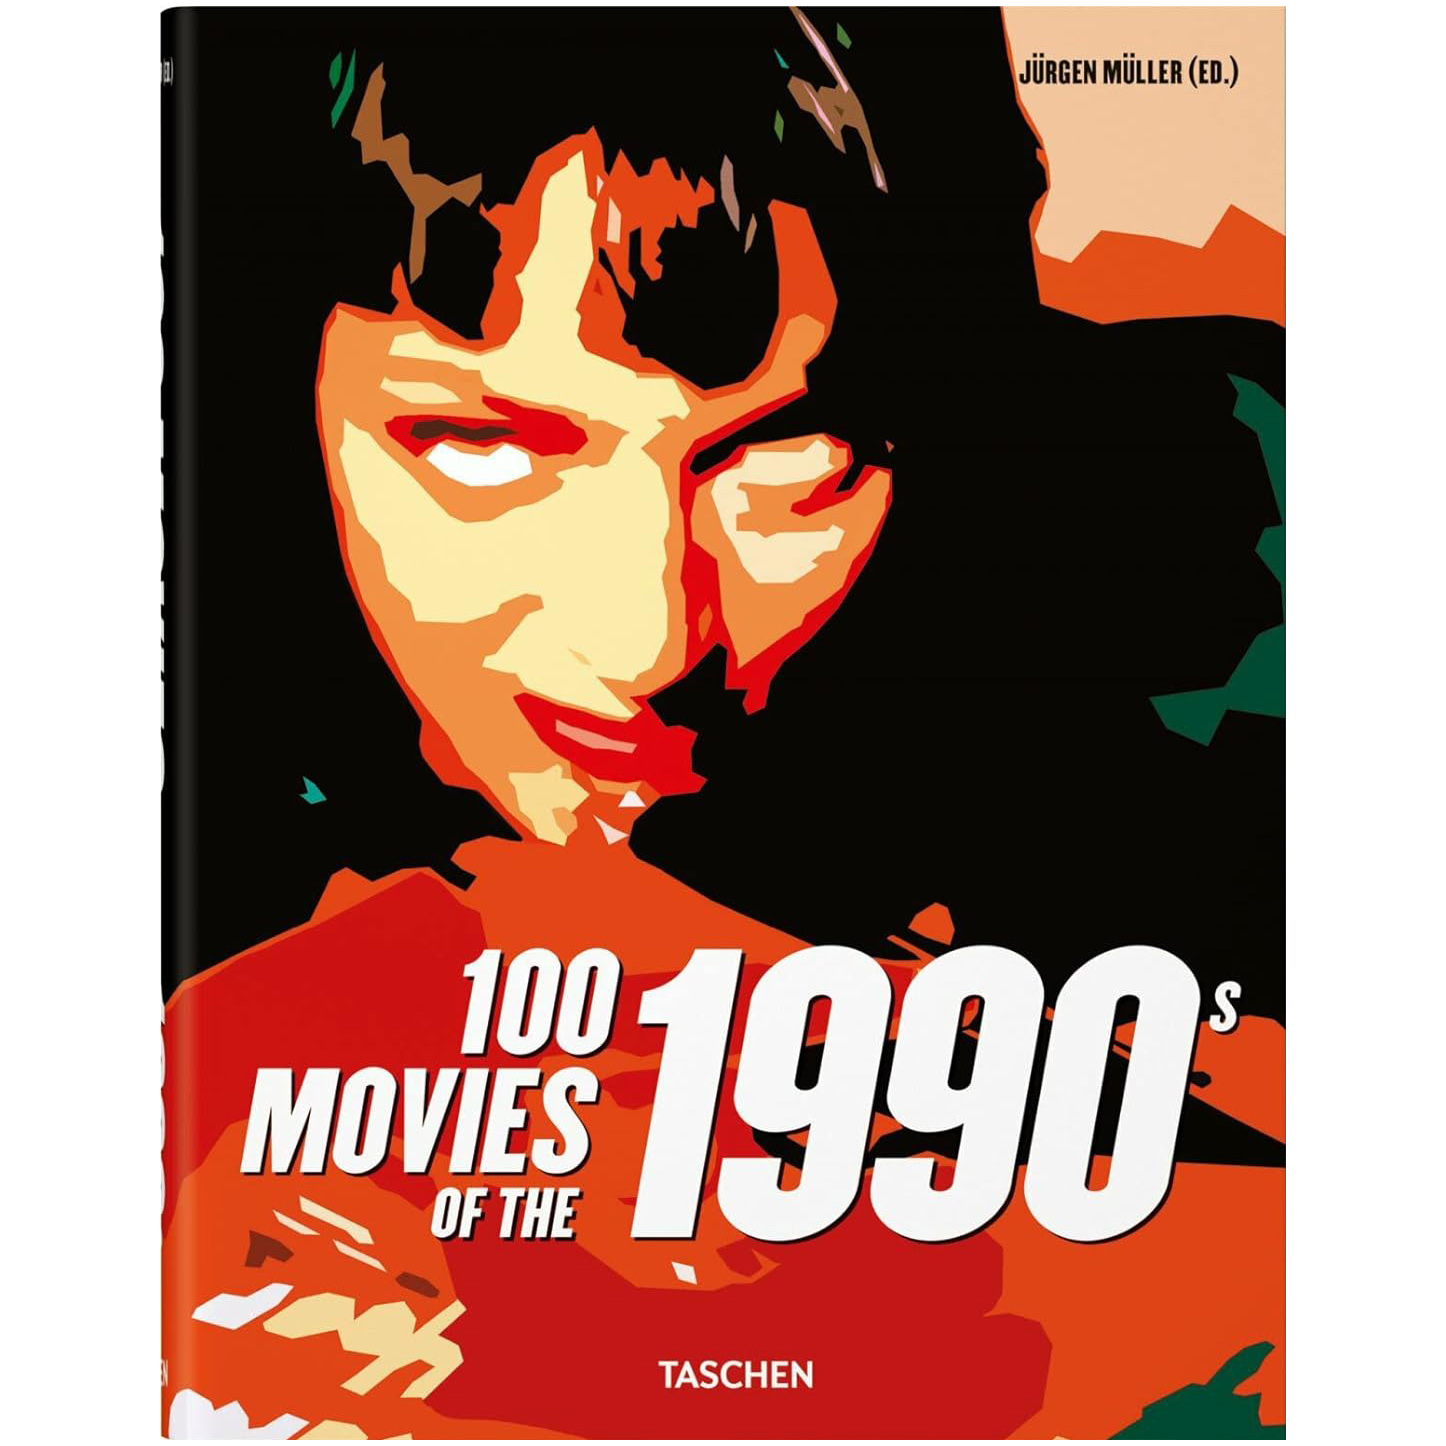 100 Movies of the 1990s